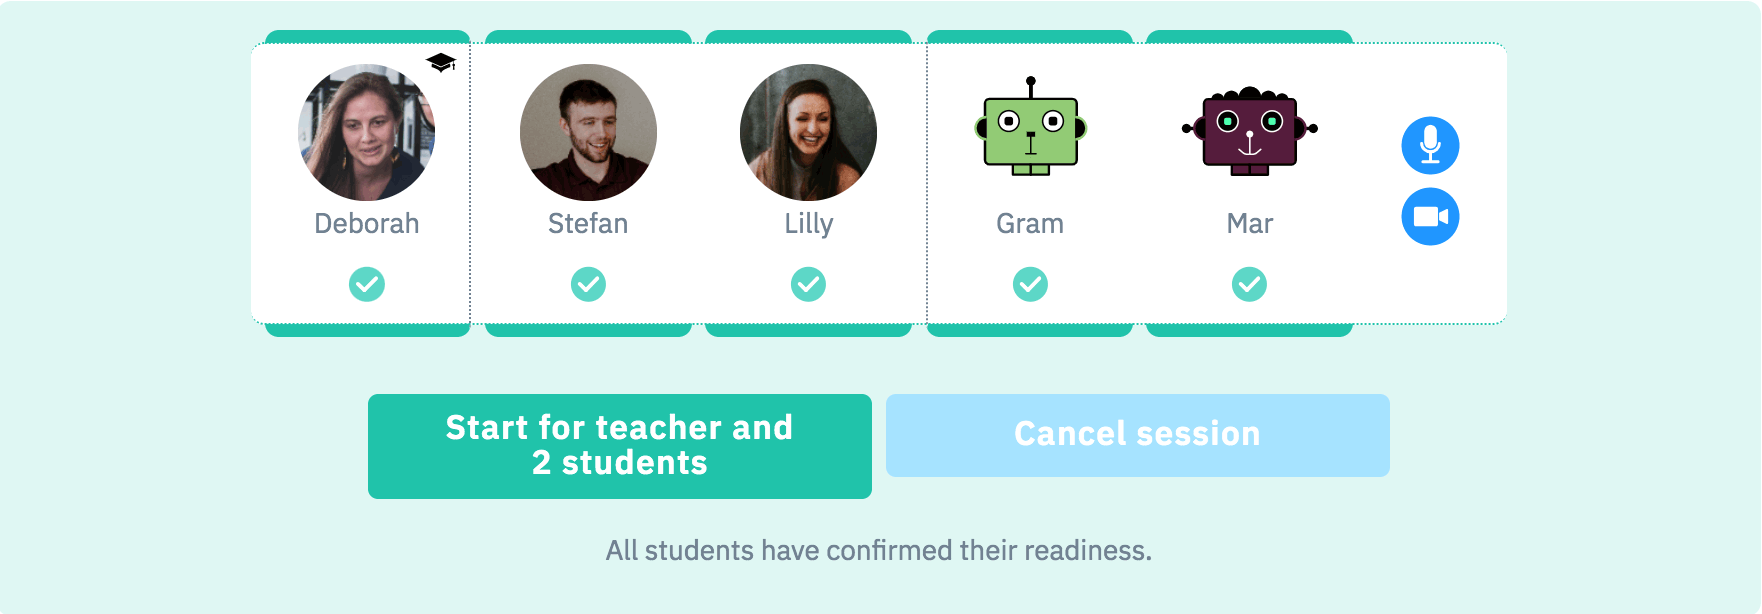 Waiting for students to confirm their readiness